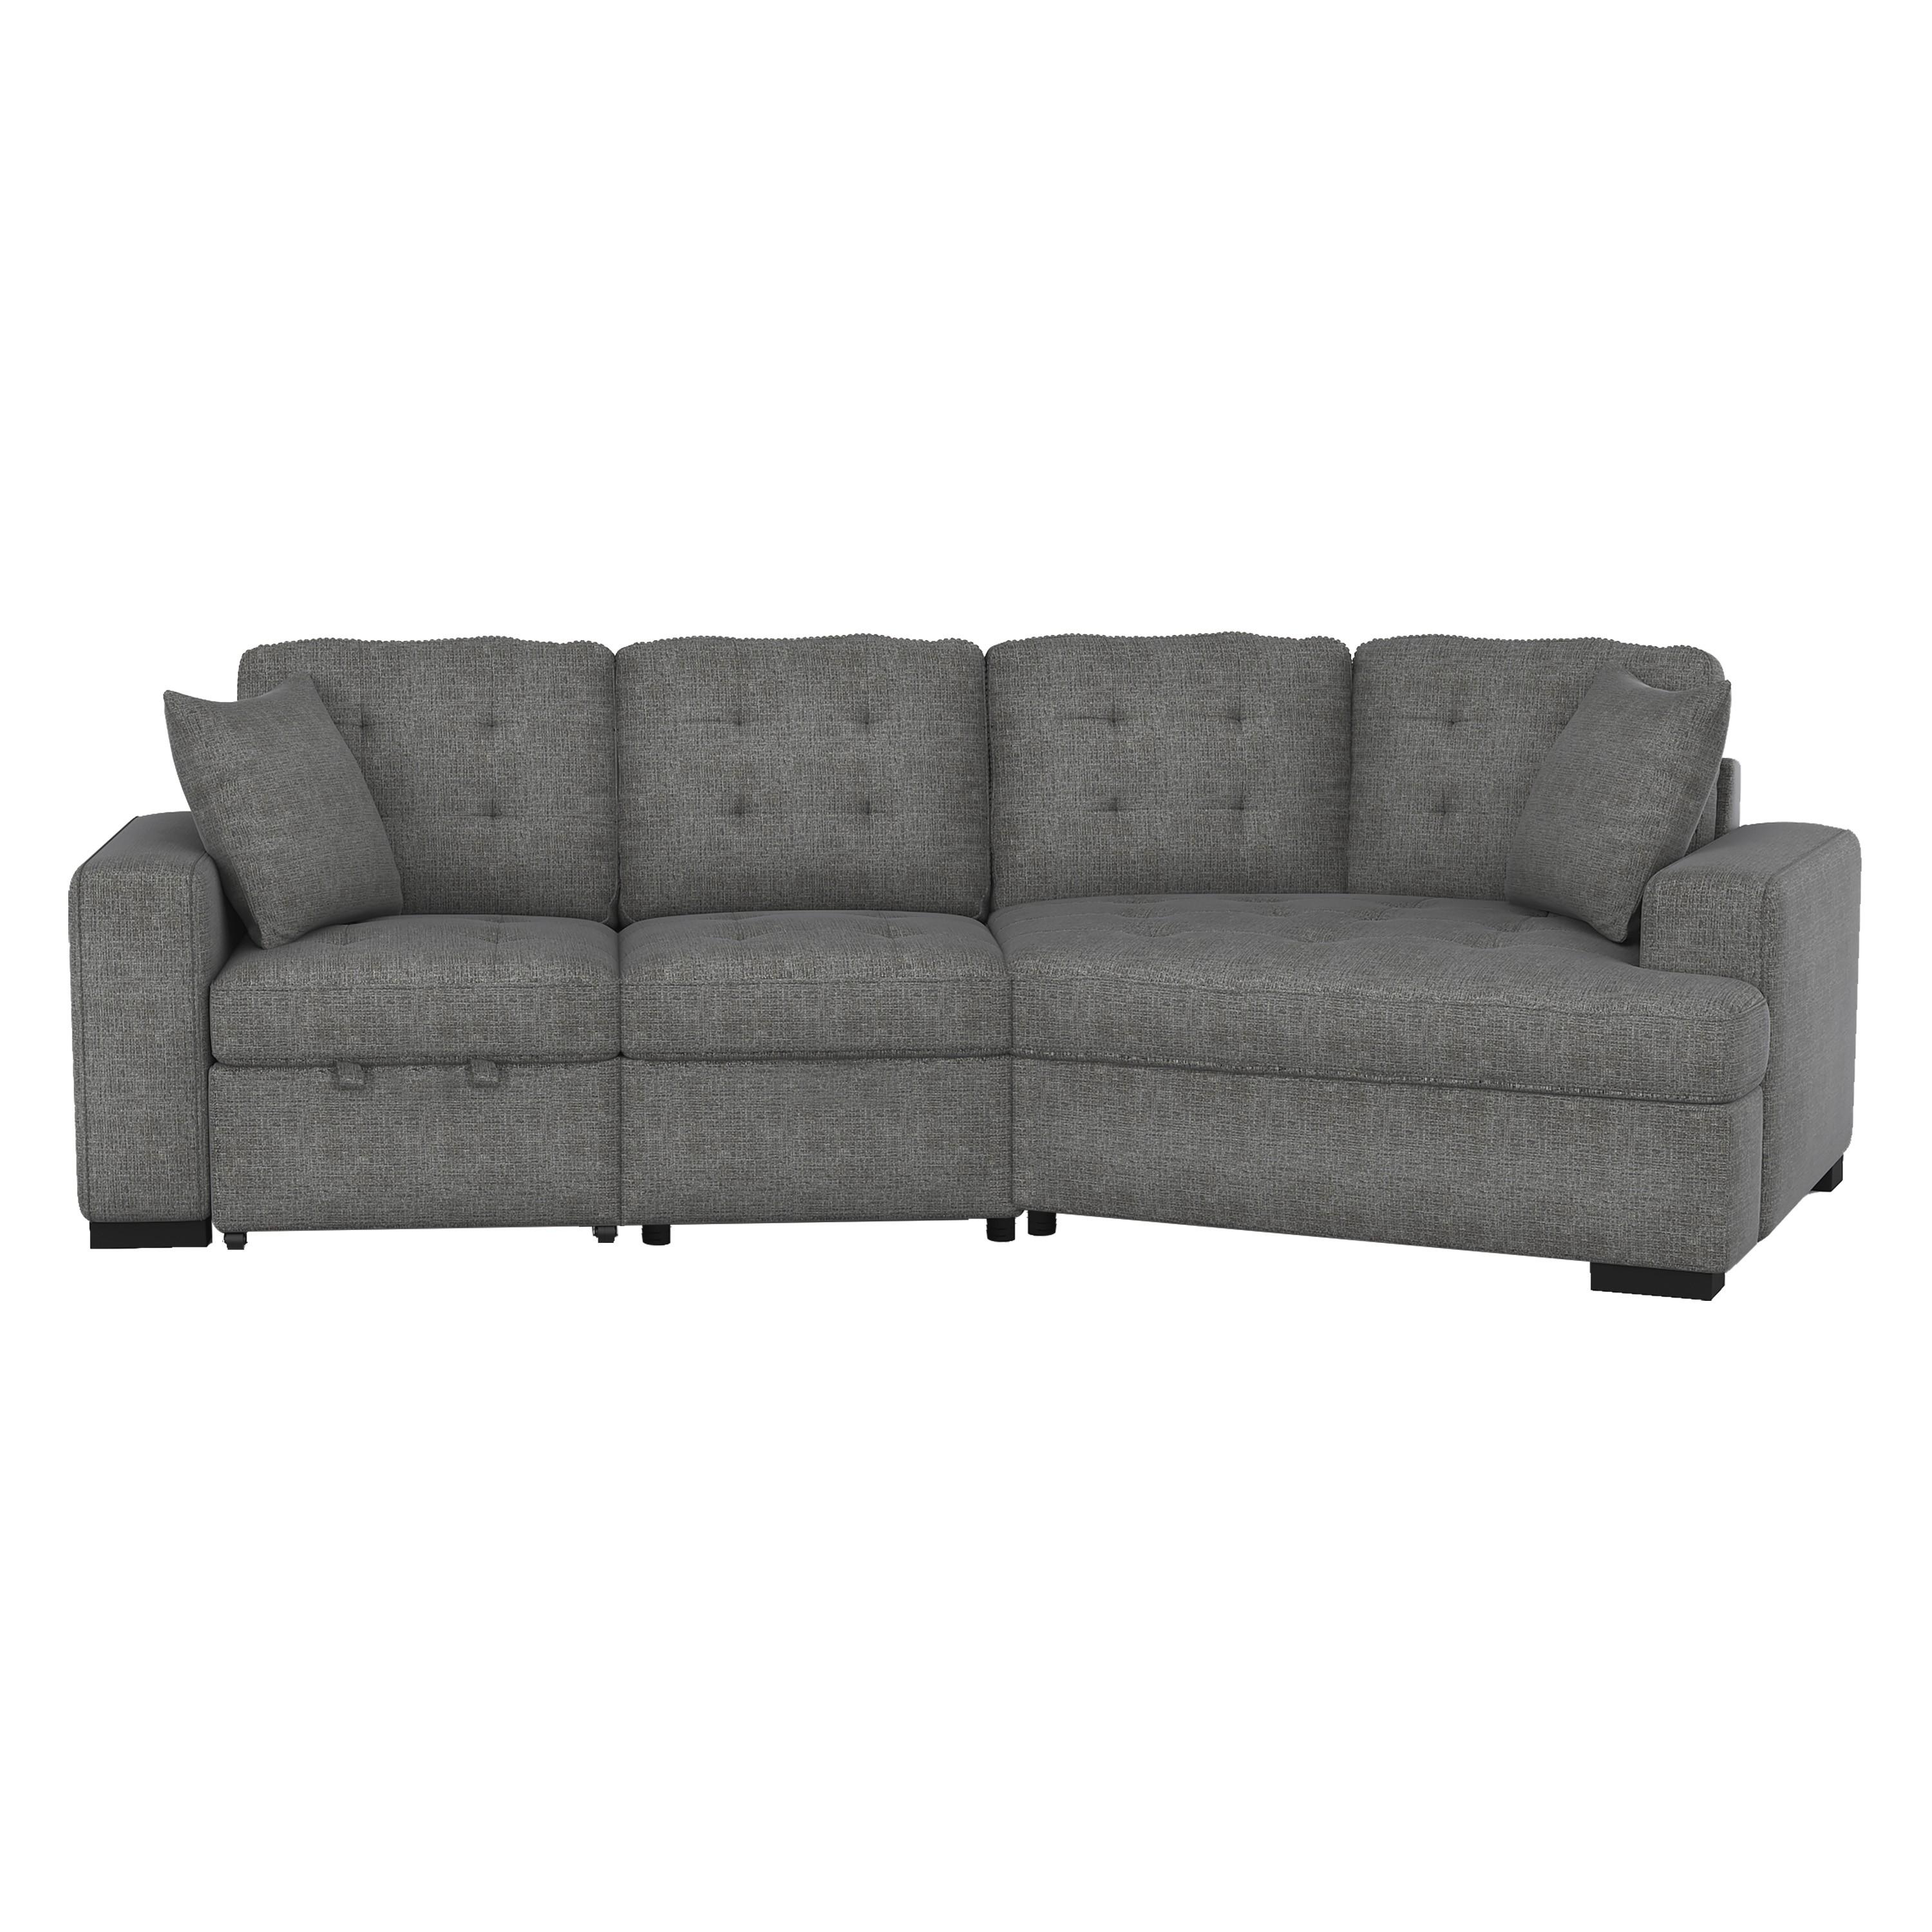 Transitional Sectional 9401GRY*22LRU Logansport 9401GRY*22LRU in Gray Chenille